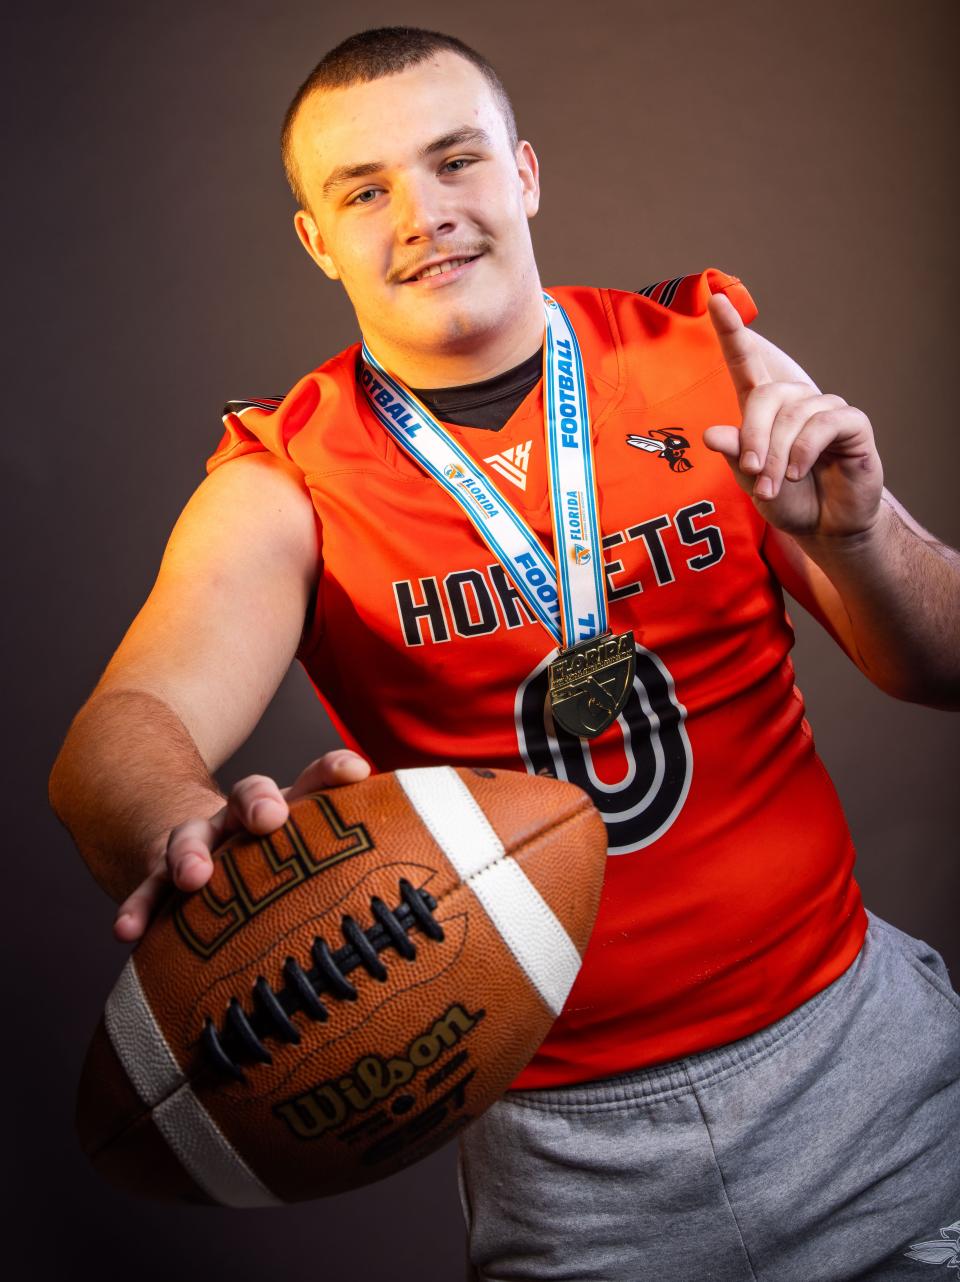 The Gainesville Sun Small School Defensive Player of the Year is linebacker Andrew Zock, of Hawthorne High School. Zock won State with his team this year and Zock was named MaxPreps Small School All-American. He poses with his State Championship medal. [Doug Engle/Ocala Star Banner]2024